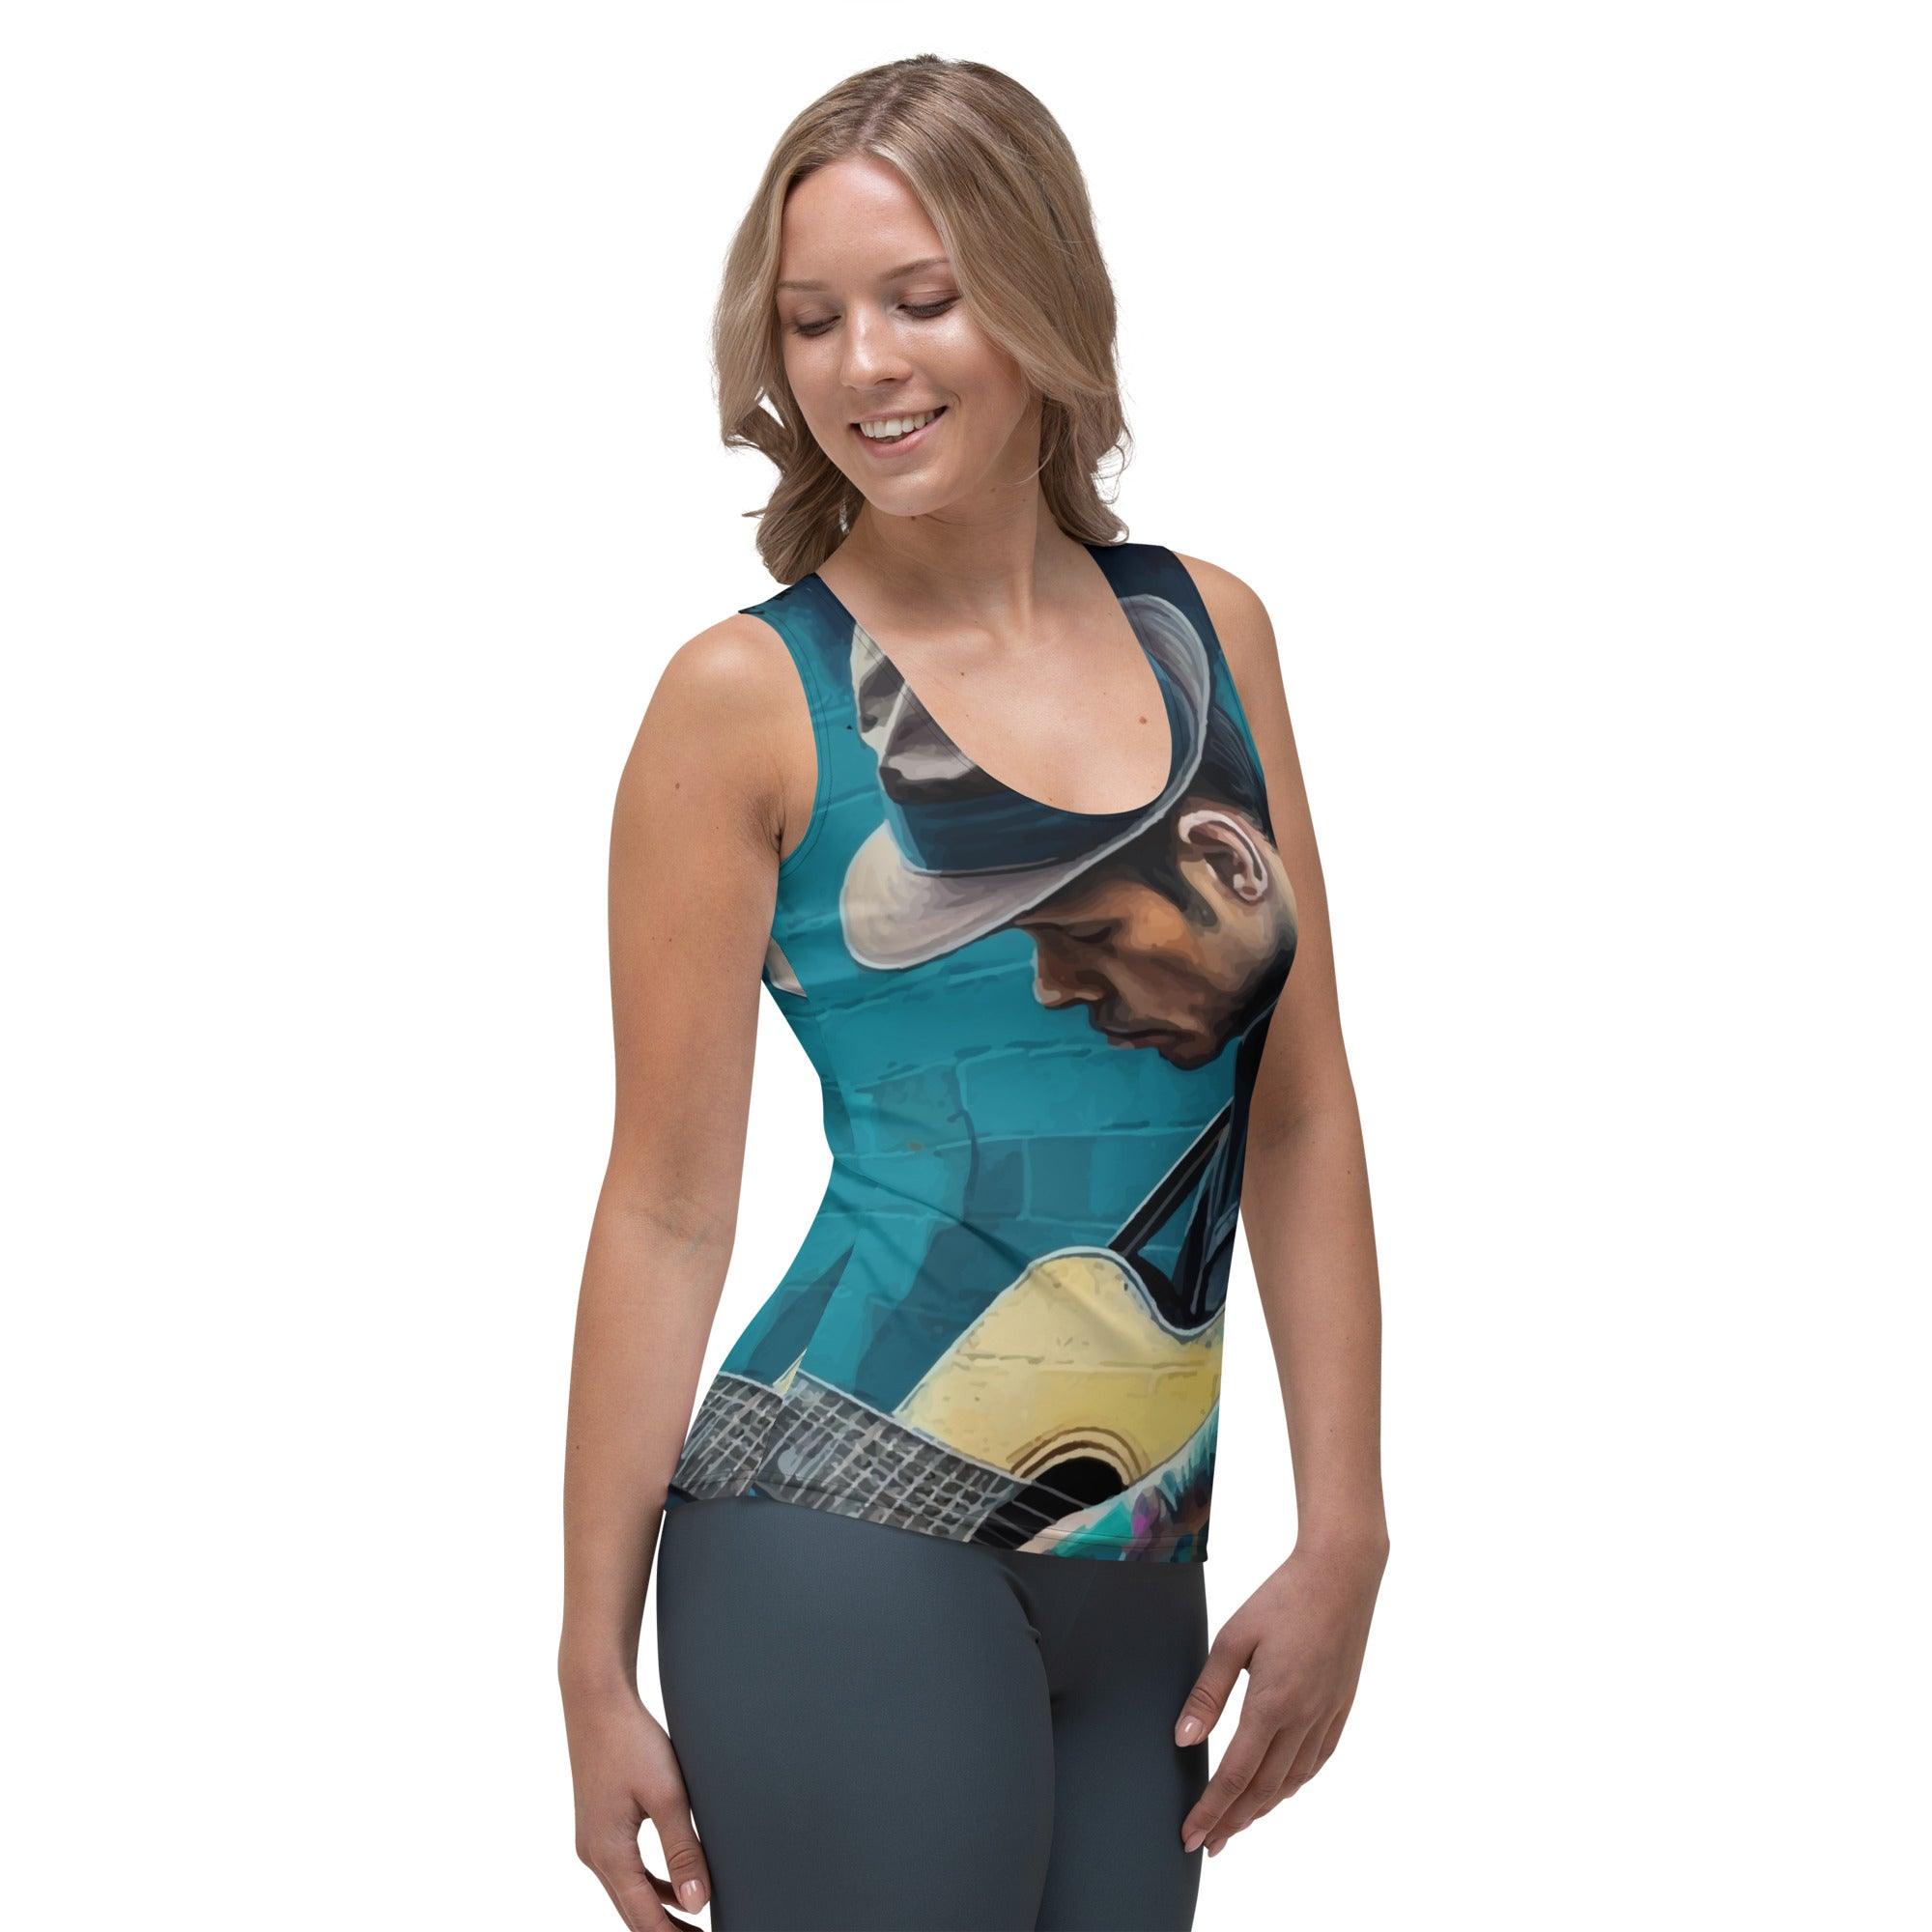 Guitarists Have The Best Fingers Sublimation Cut & Sew Tank Top - Beyond T-shirts